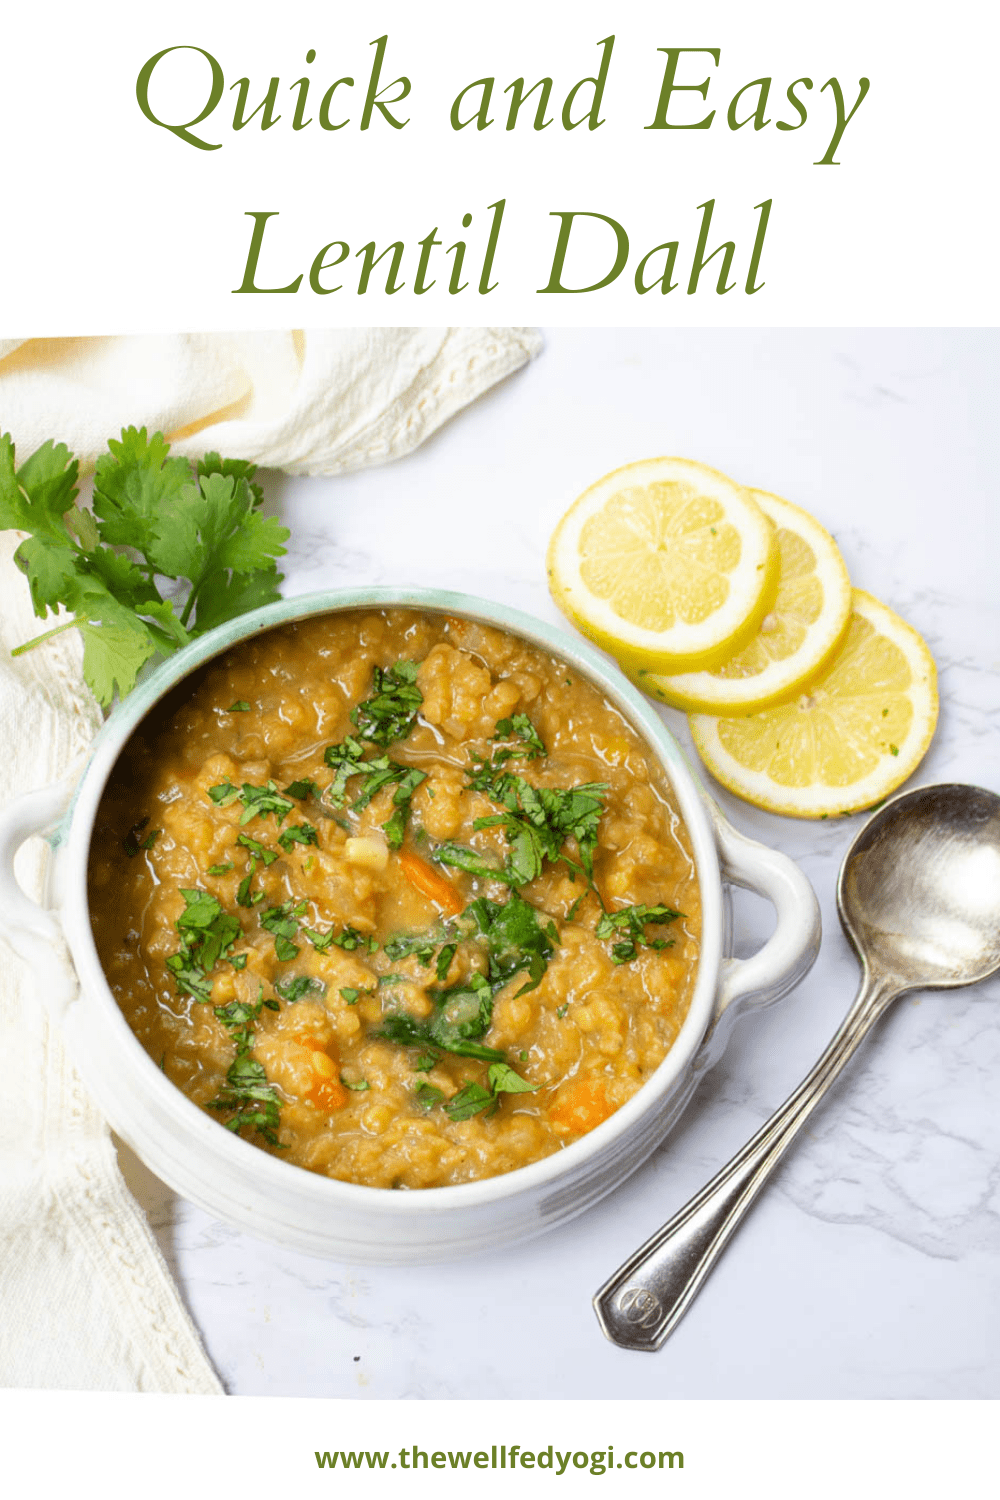 Pinterest PIn of Quick and Easy Lentil Dahl